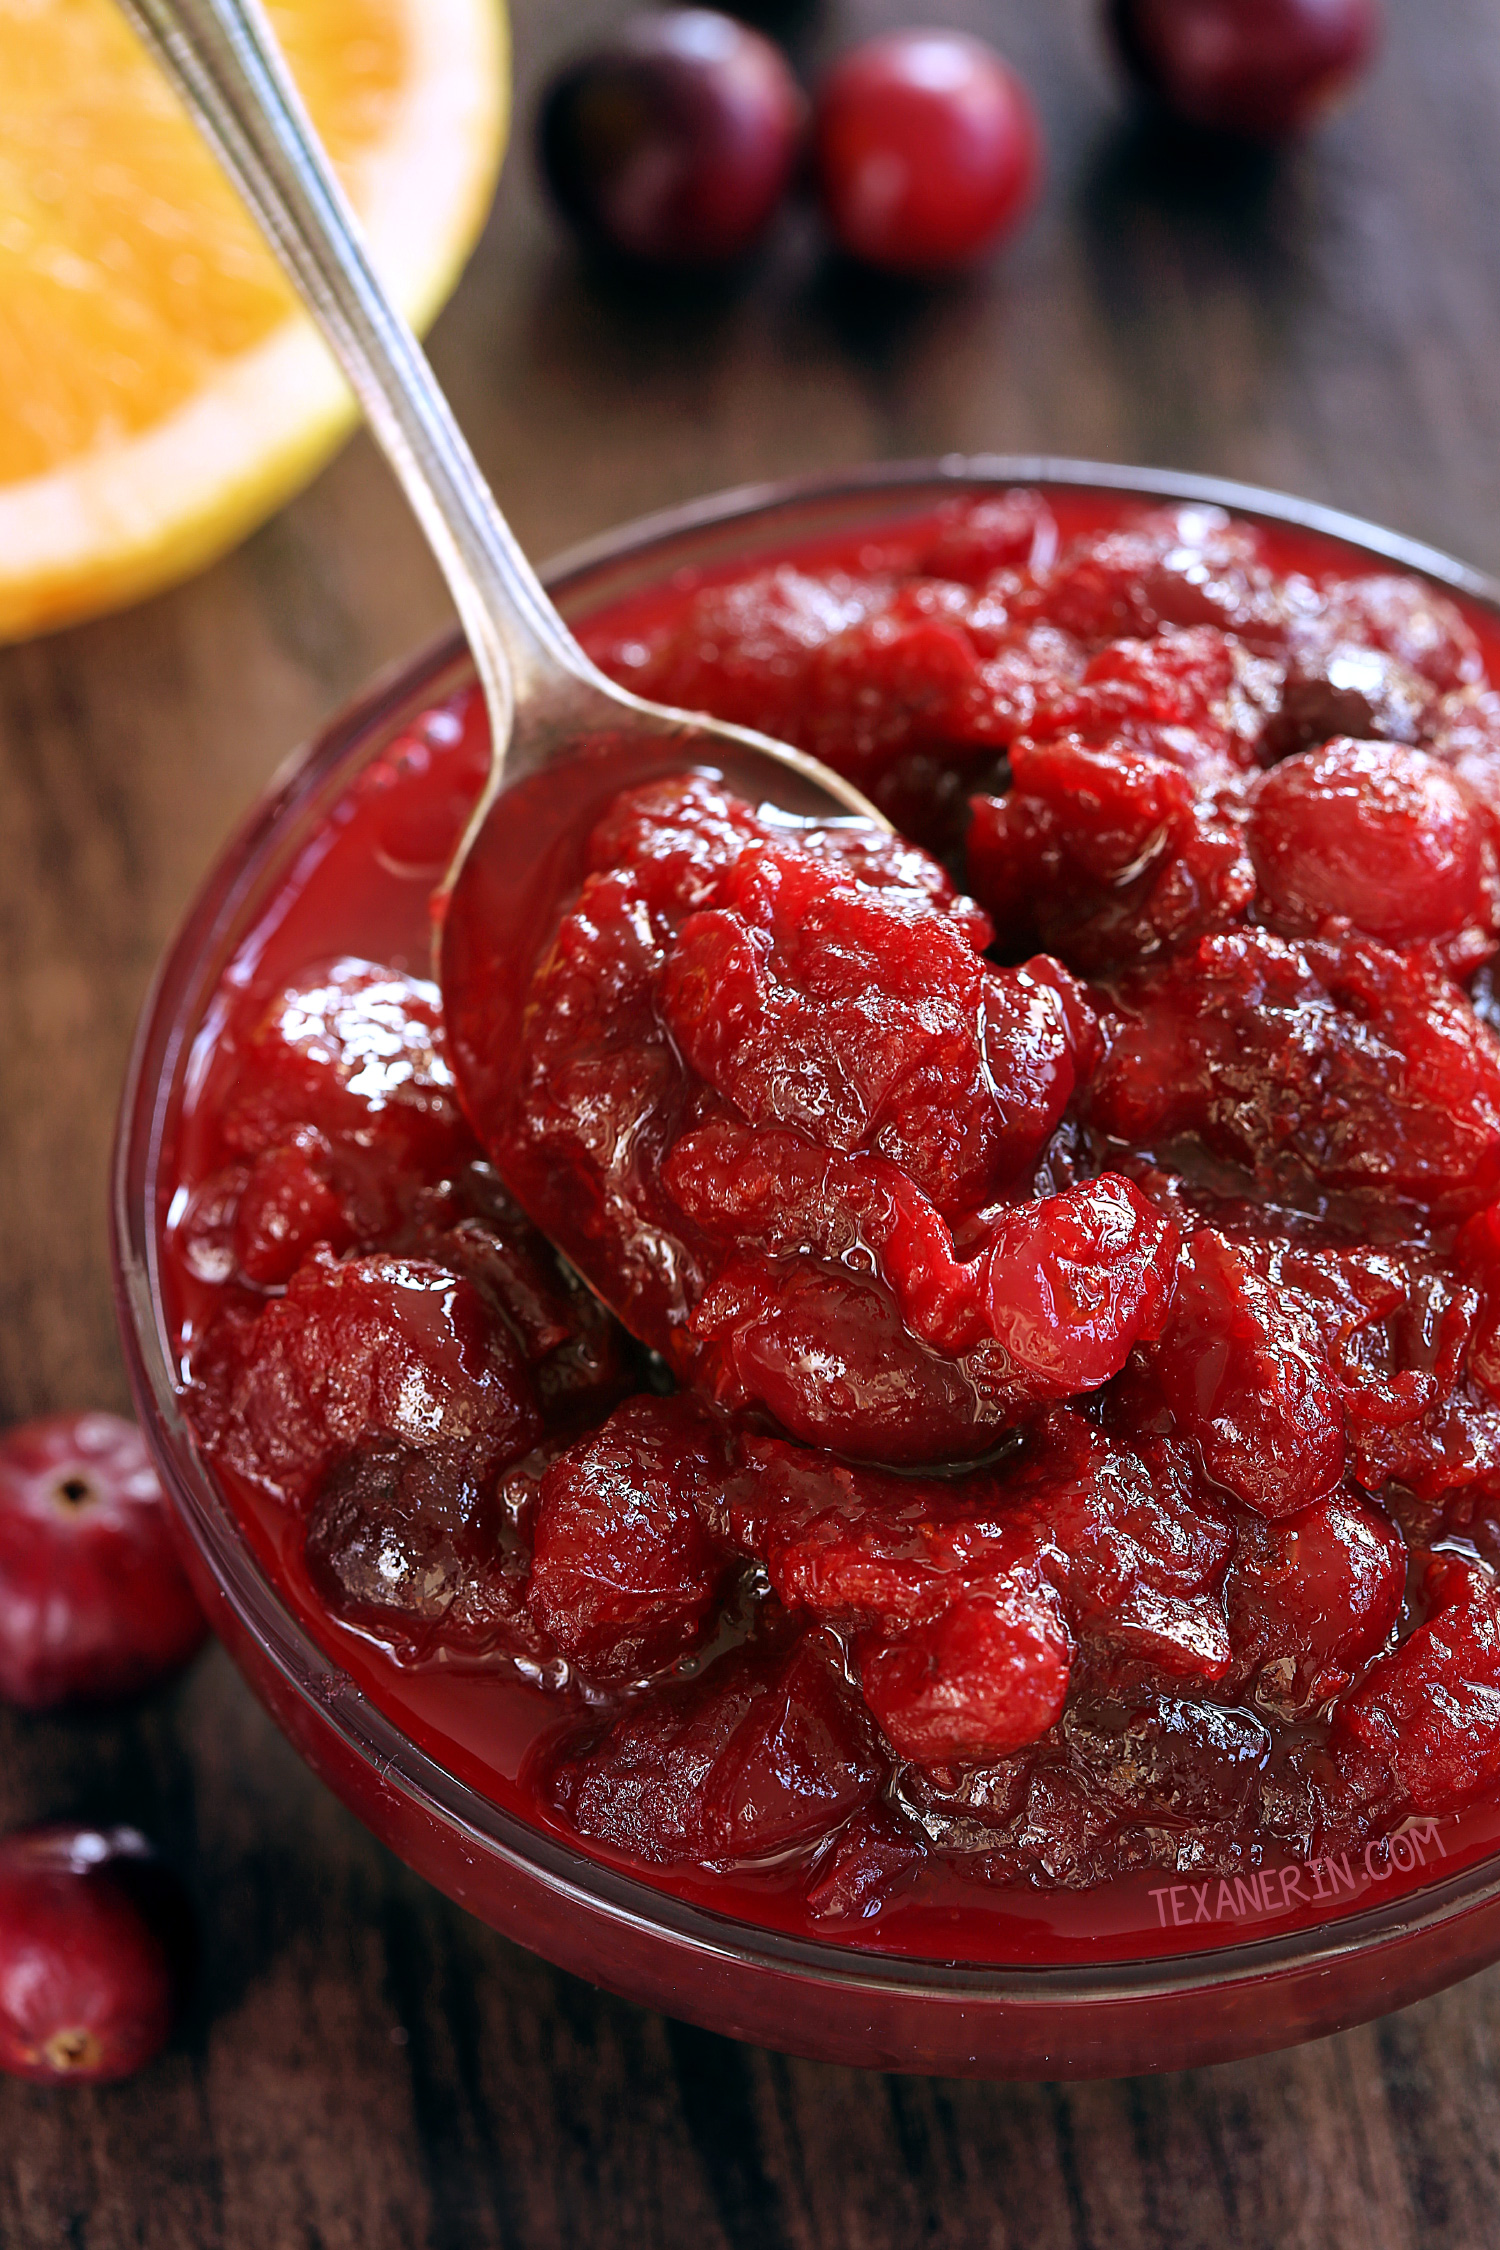 How to Make Cranberry Sauce Texanerin Baking